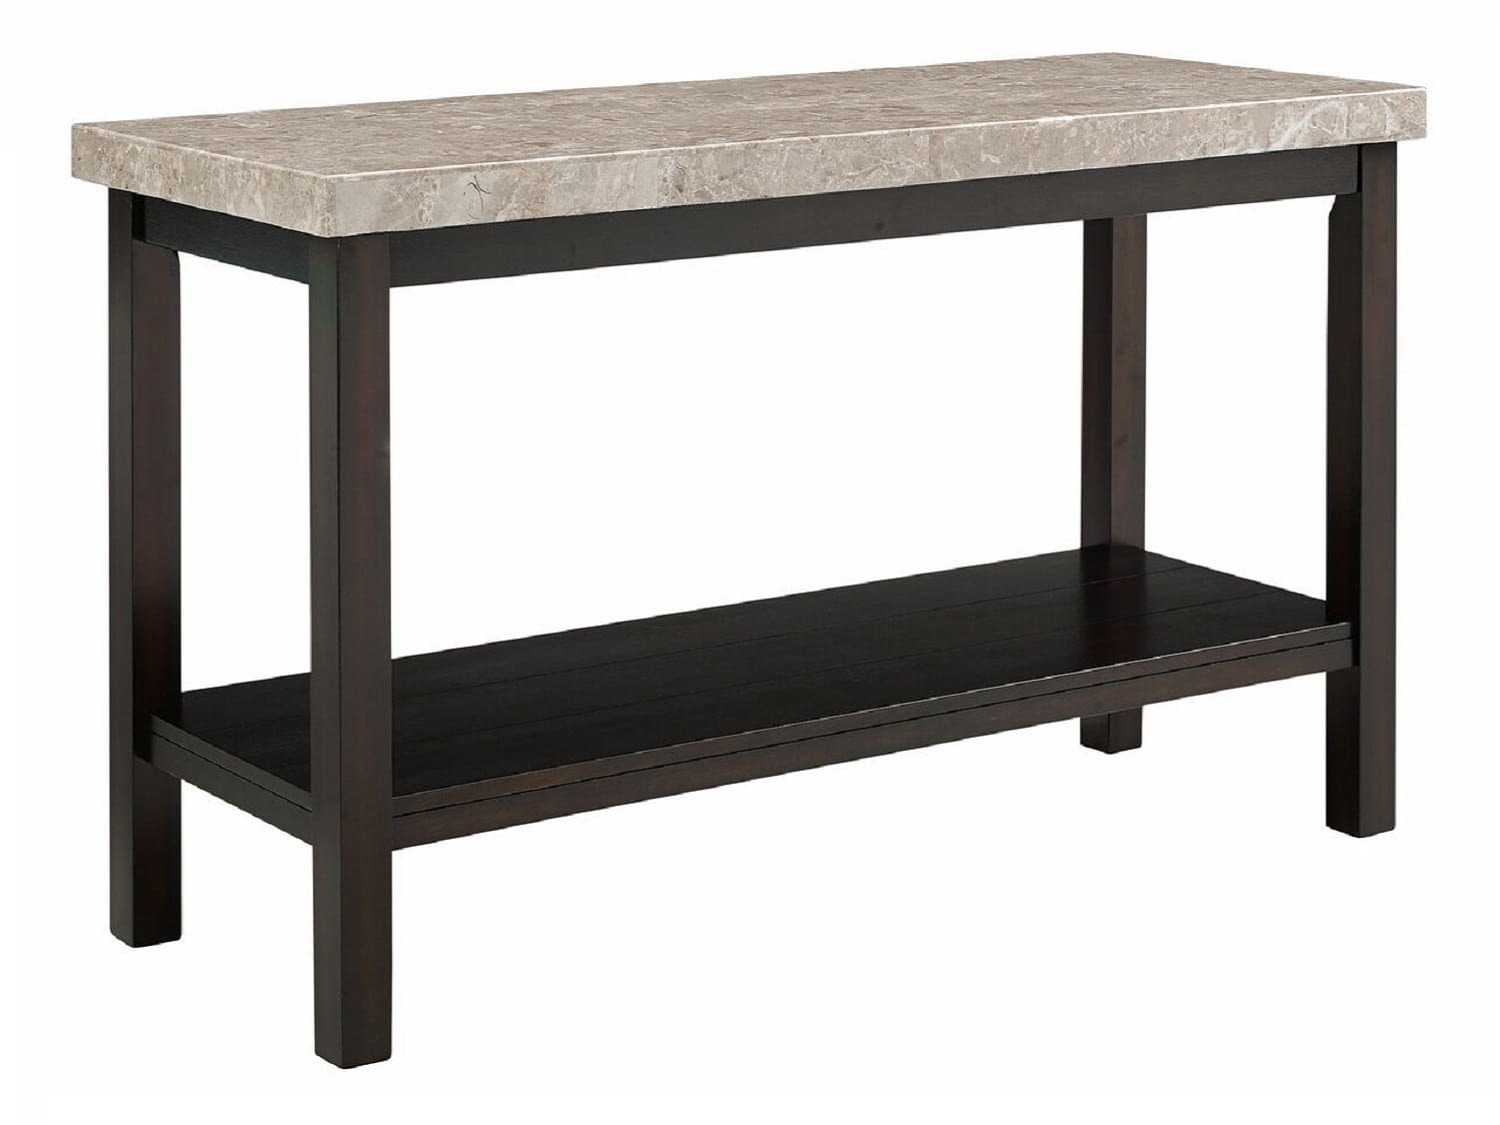 ADKINS Console Table - Zoom